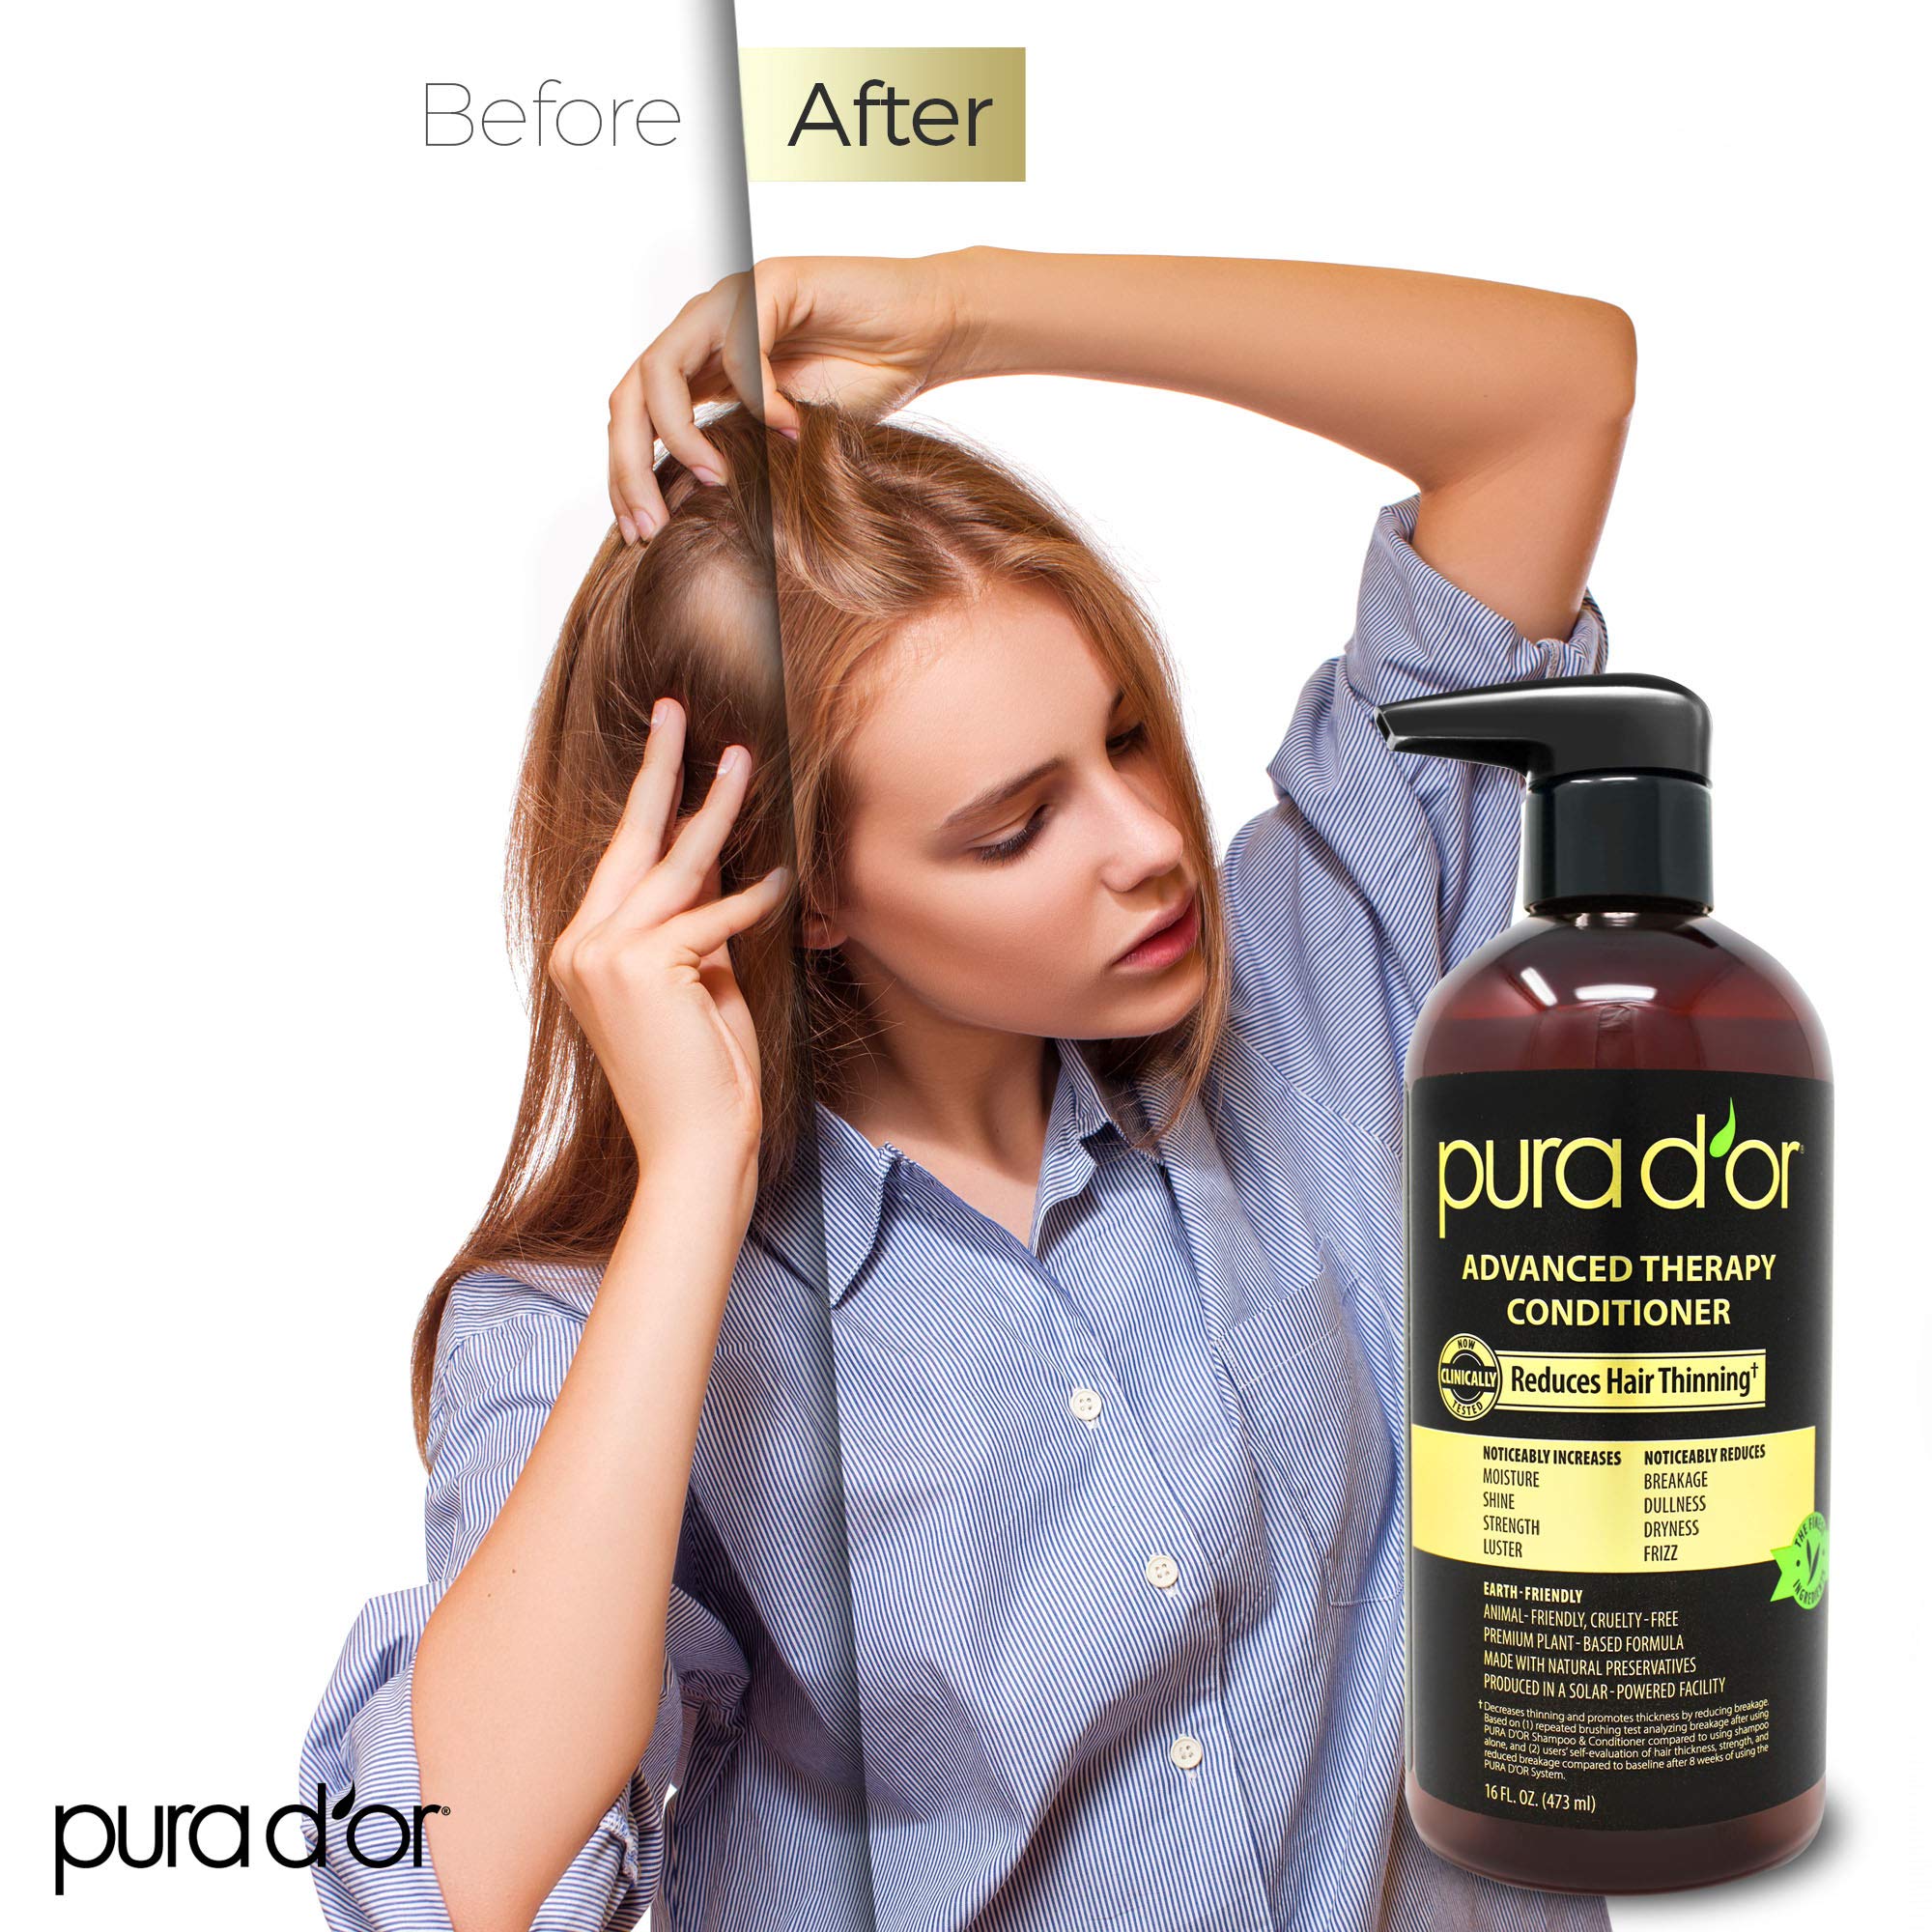 PURA D'OR Advanced Therapy Conditioner (16oz) For Increased Moisture, Strength, Volume & Texture, No Sulfates, Made with Argan Oil & Biotin, All Hair Types, Men & Women (Packaging May Vary)